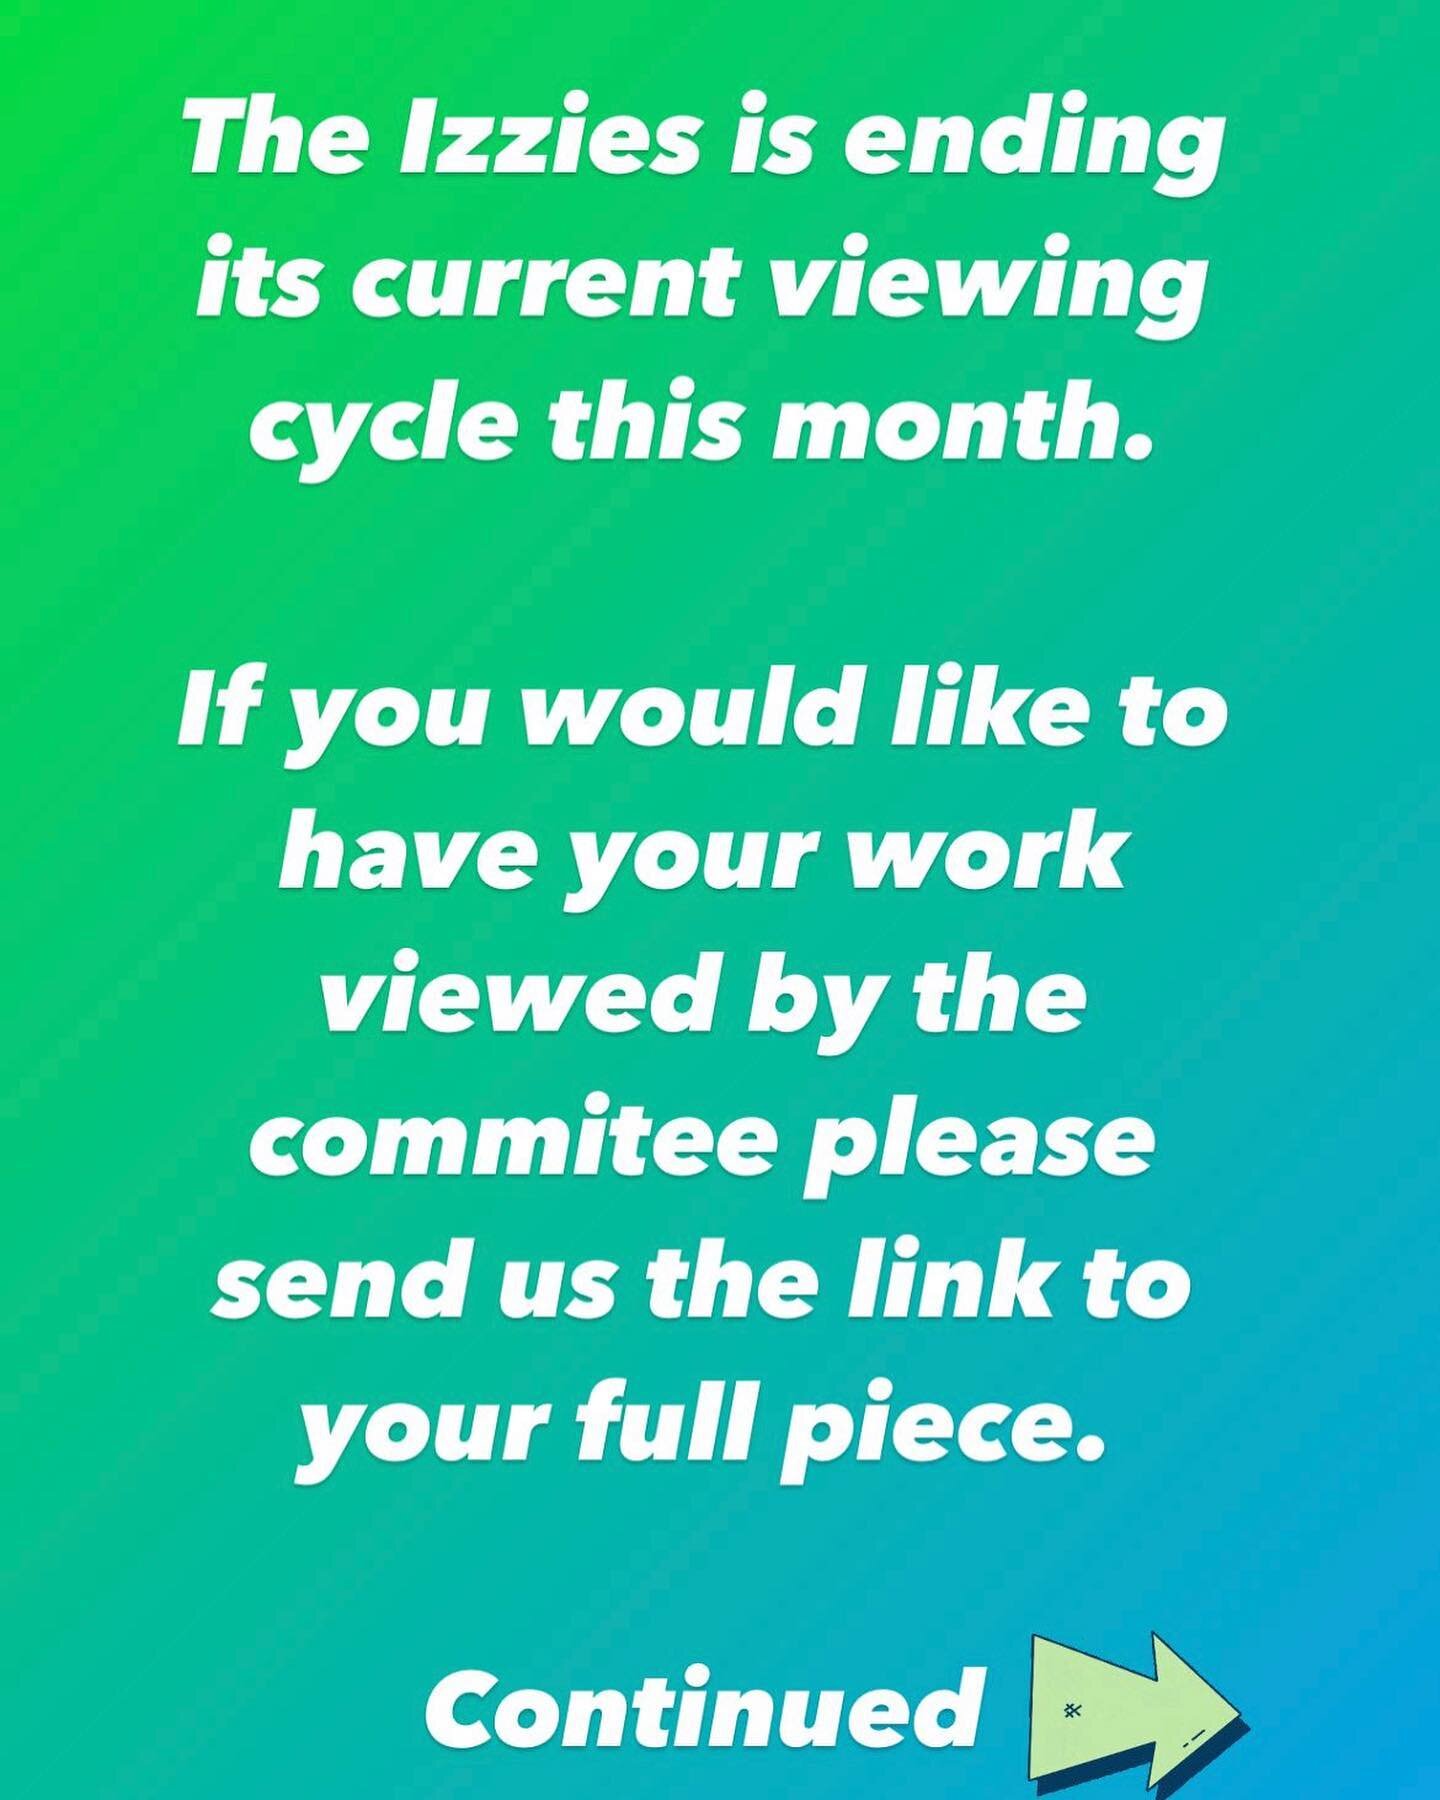 Our viewing cycle is coming to a close. We want to see your work! 

For works from September 2021-August 2022 from the counties mentioned in the post. 

Send us your links by Aug 8, 2022 for consideration!